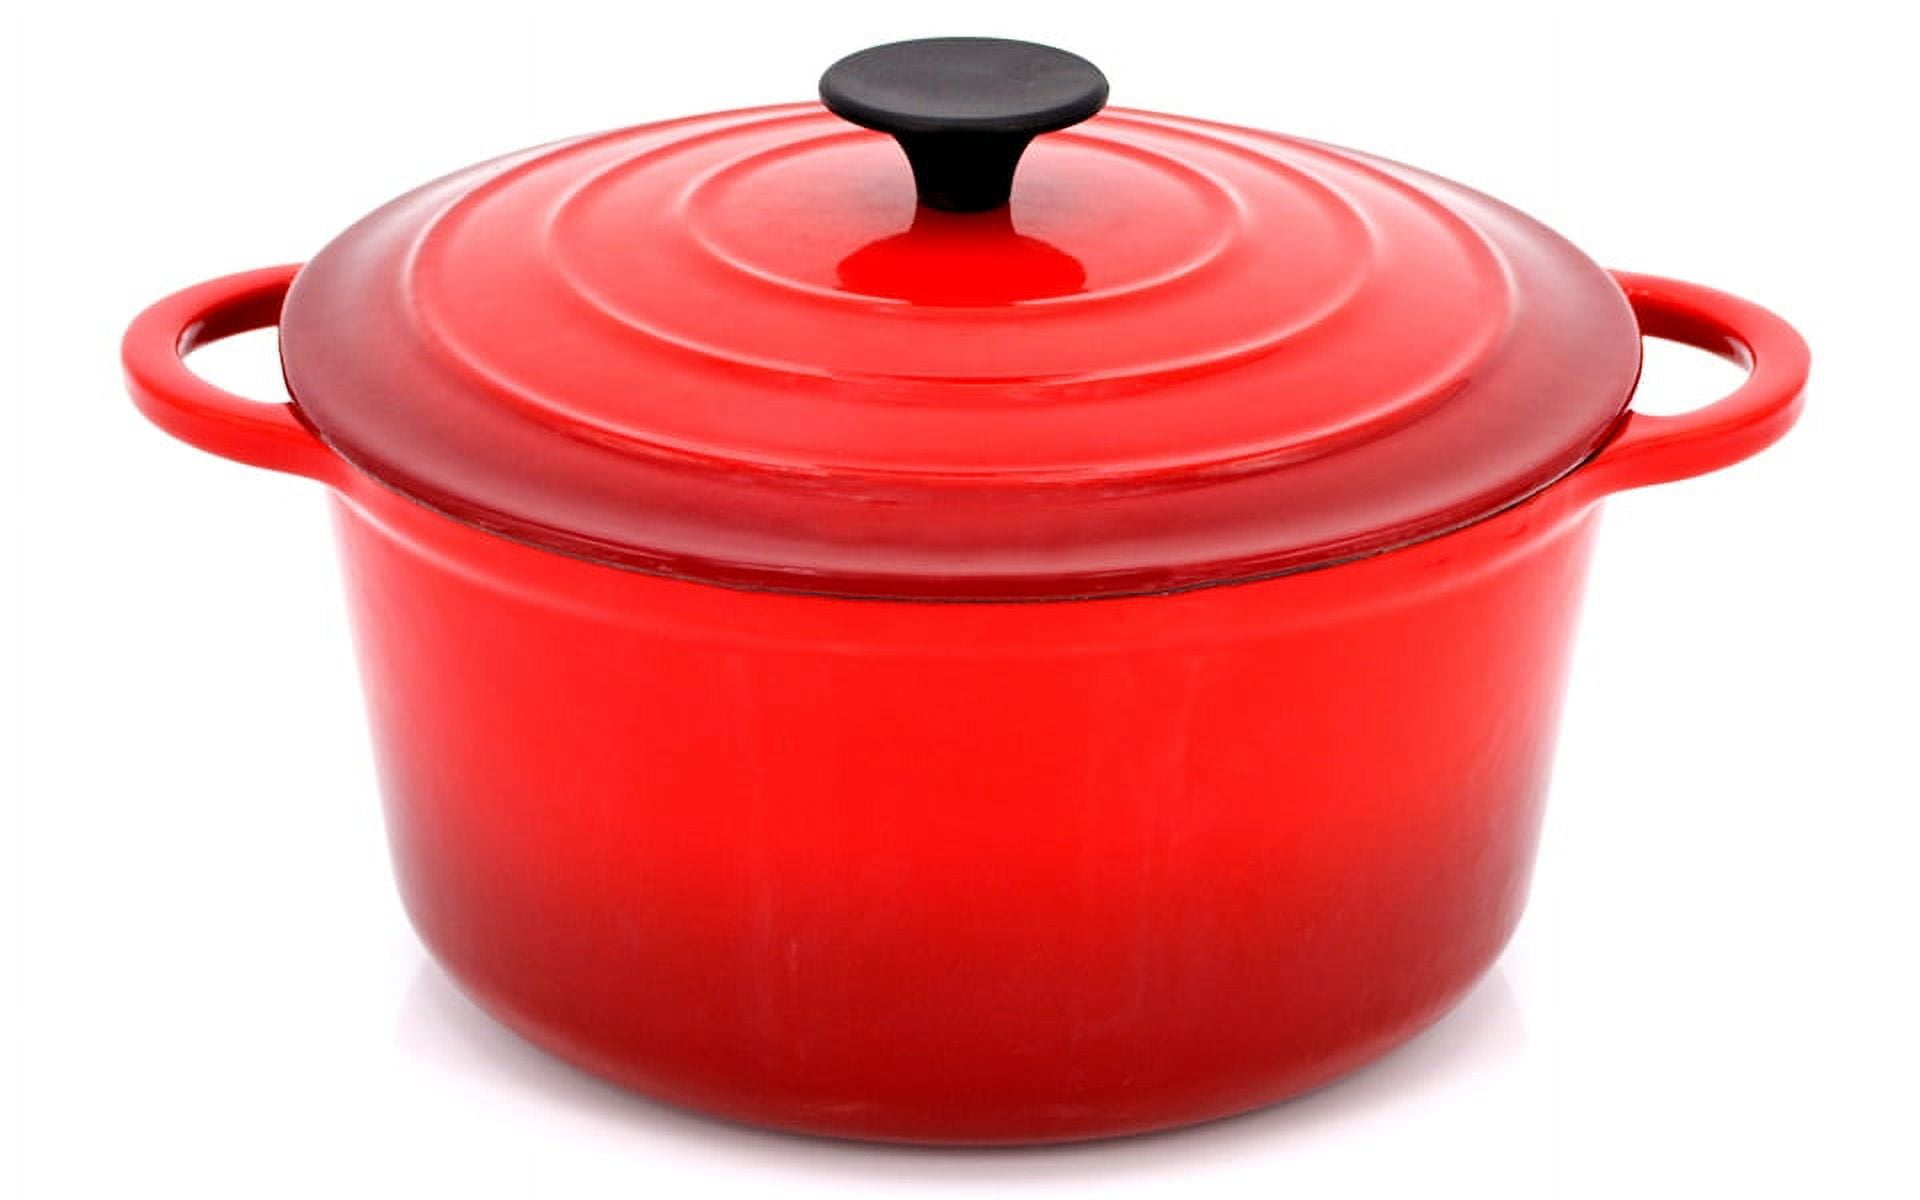 KUTIME Cast Iron Dutch Oven 3 Quart Enameled Dutch Oven, Stock Pot with  Lid, Red 